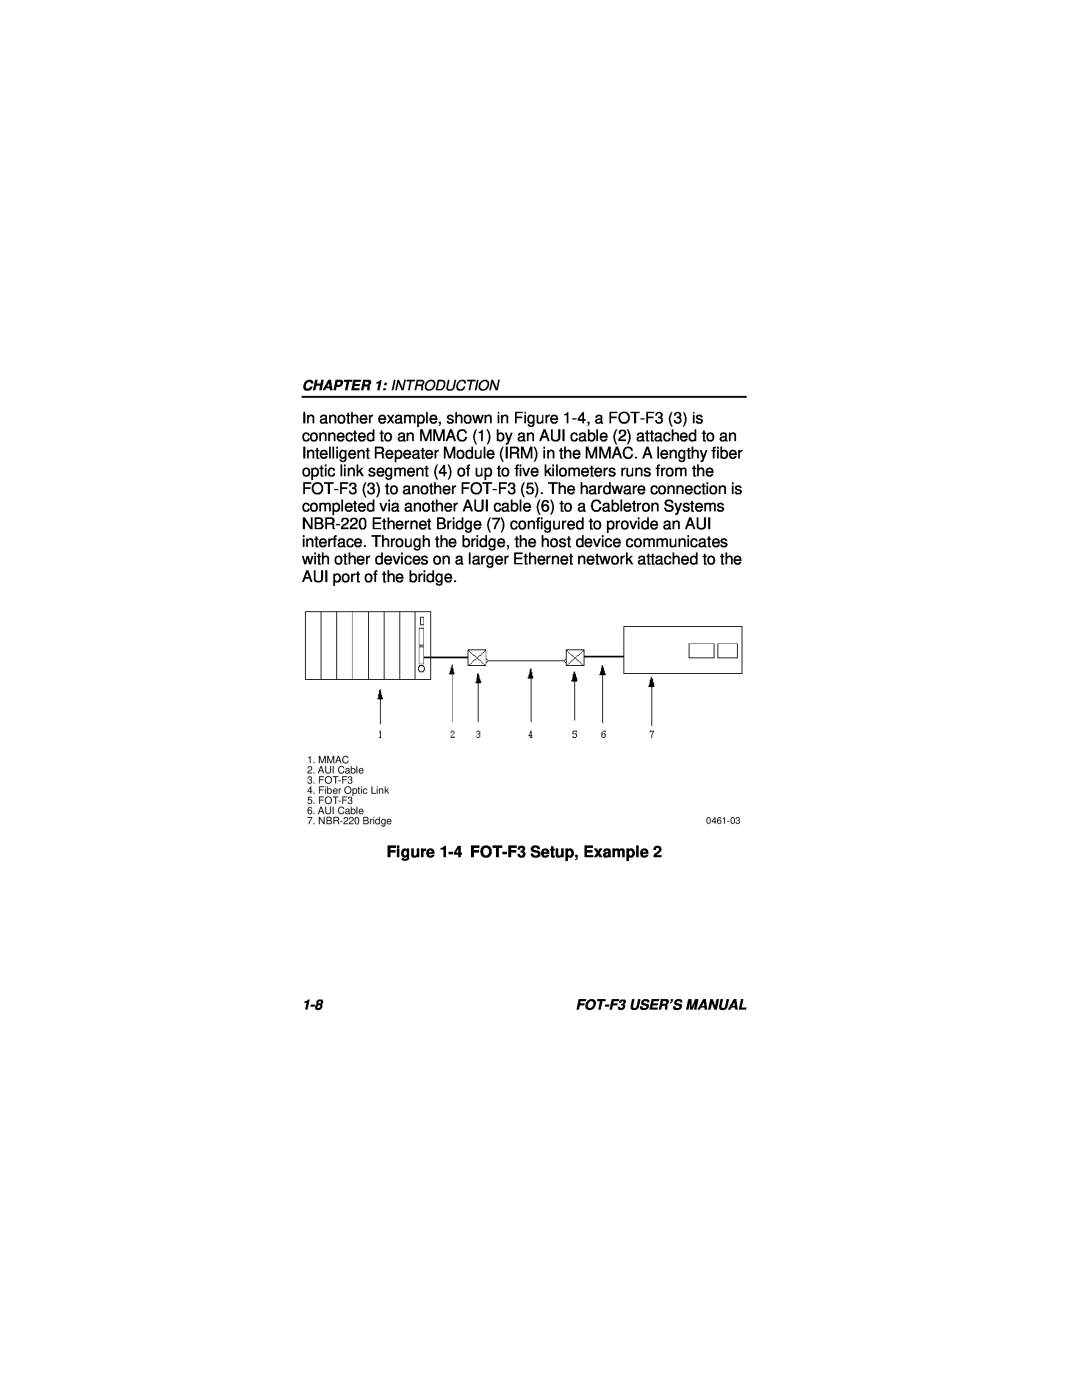 Cabletron Systems user manual 4 FOT-F3 Setup, Example 